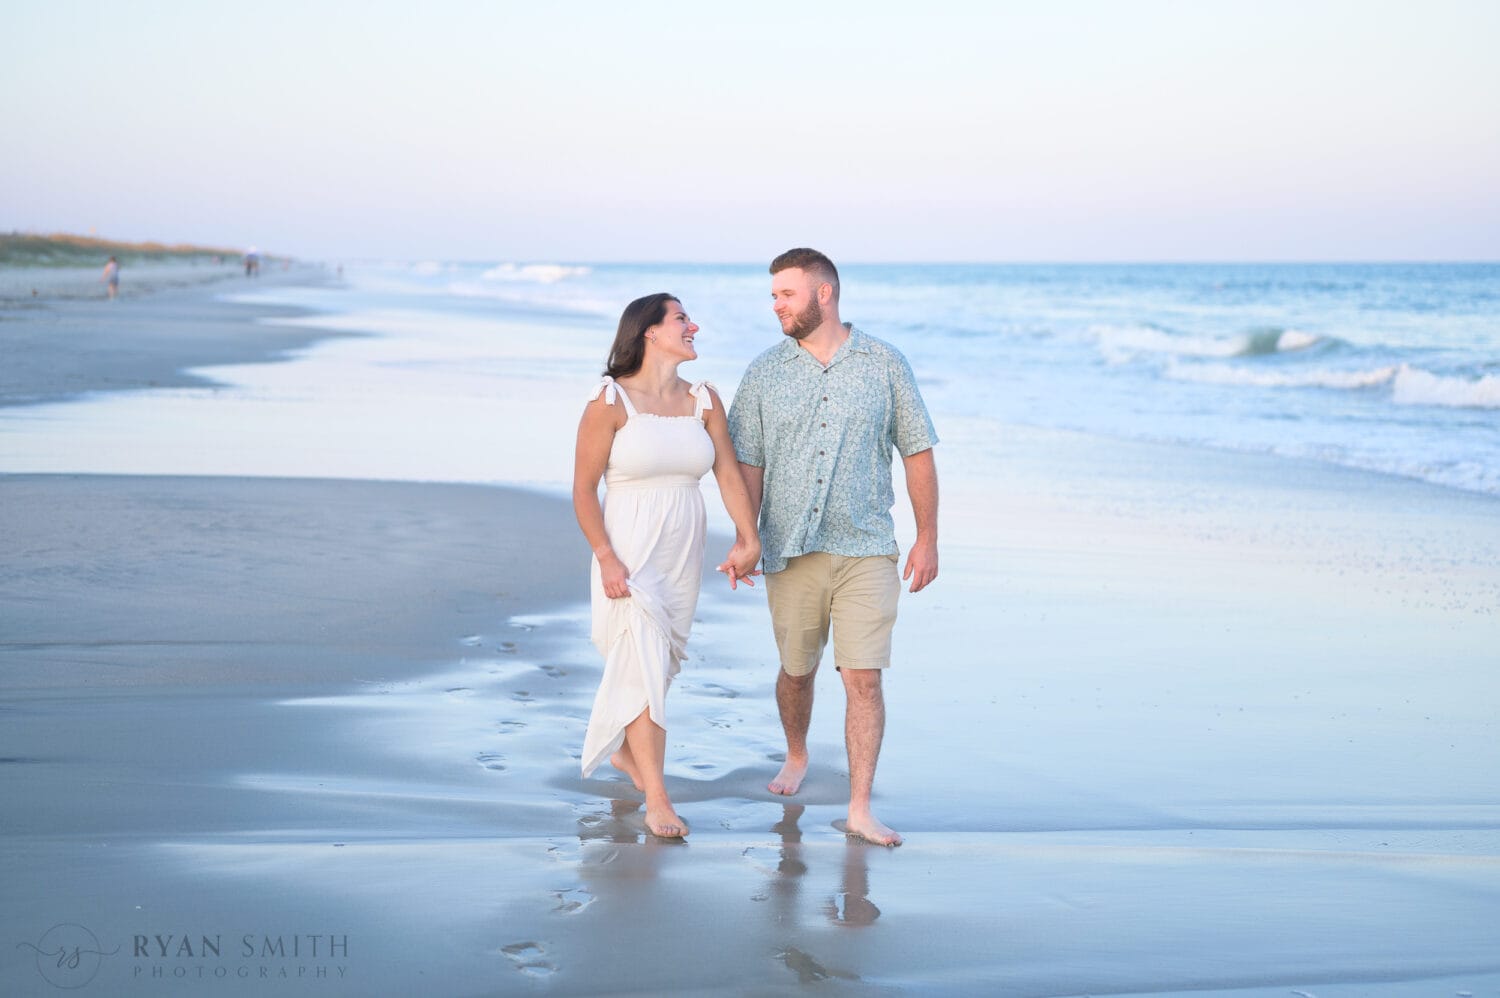 Walking together in the ocean - Huntington Beach State Park - Myrtle Beach